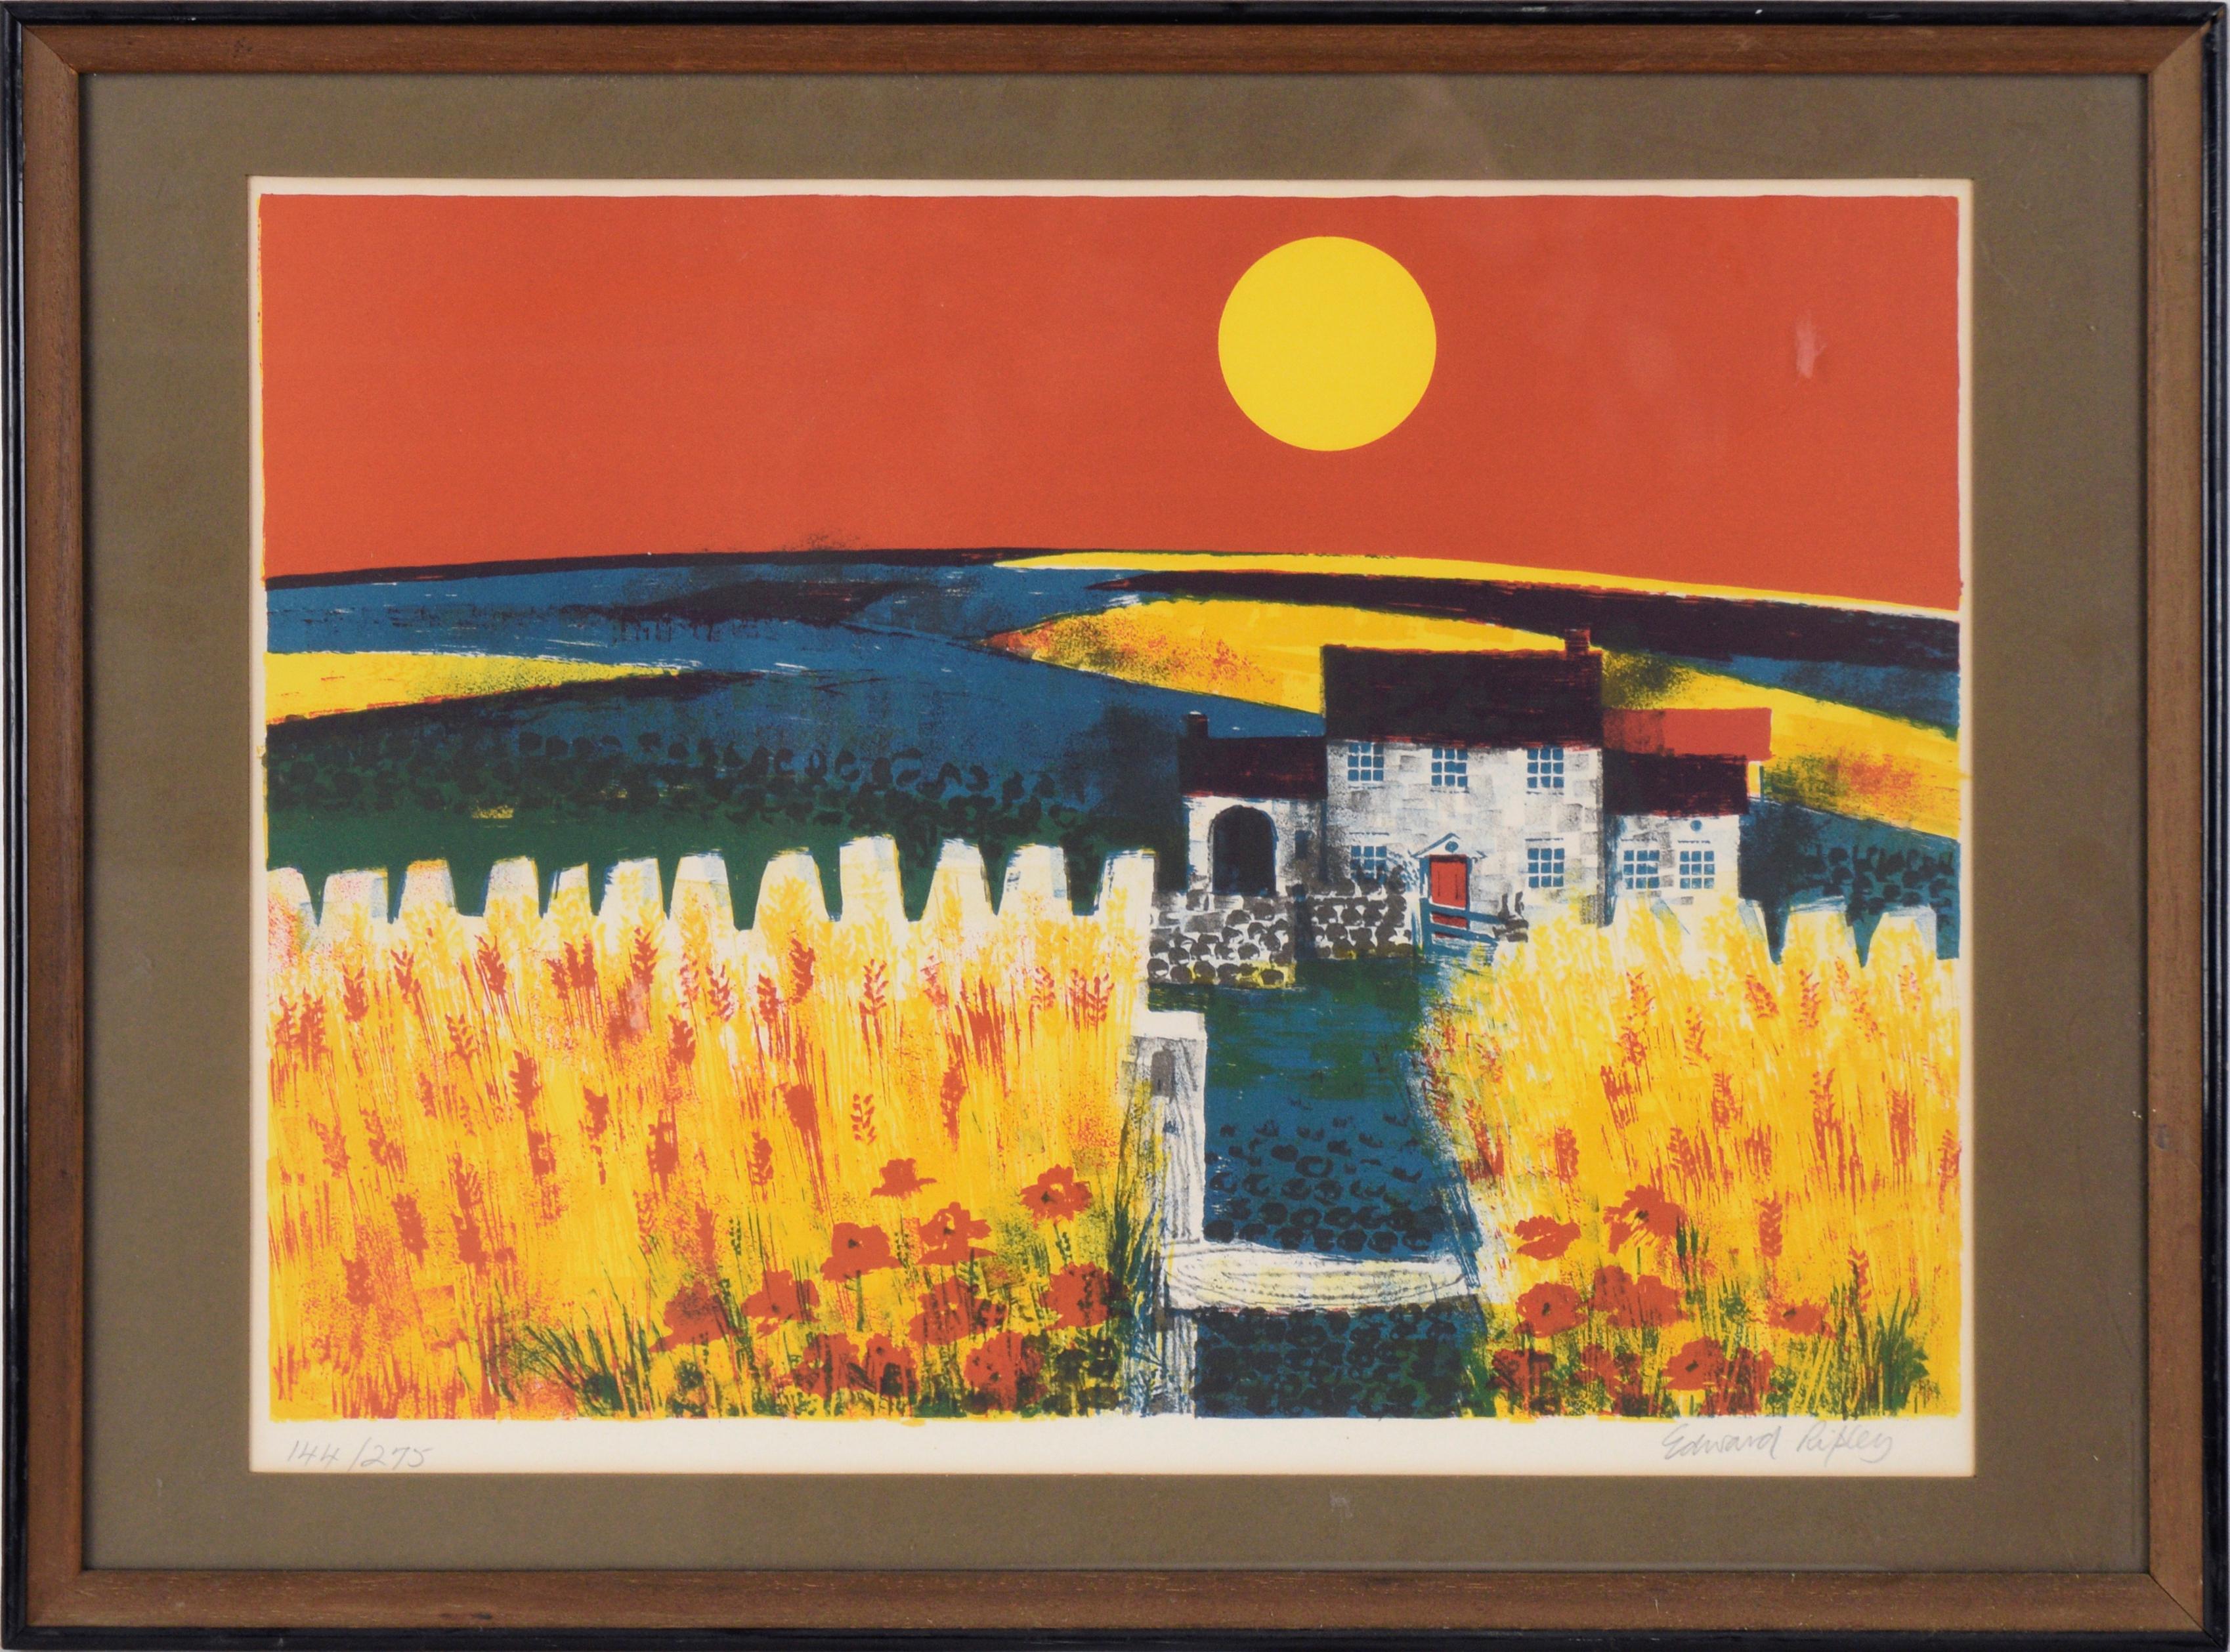 Farmhouse and the Wheat Field at Sunset - Landscape Lithograph in Ink on Paper